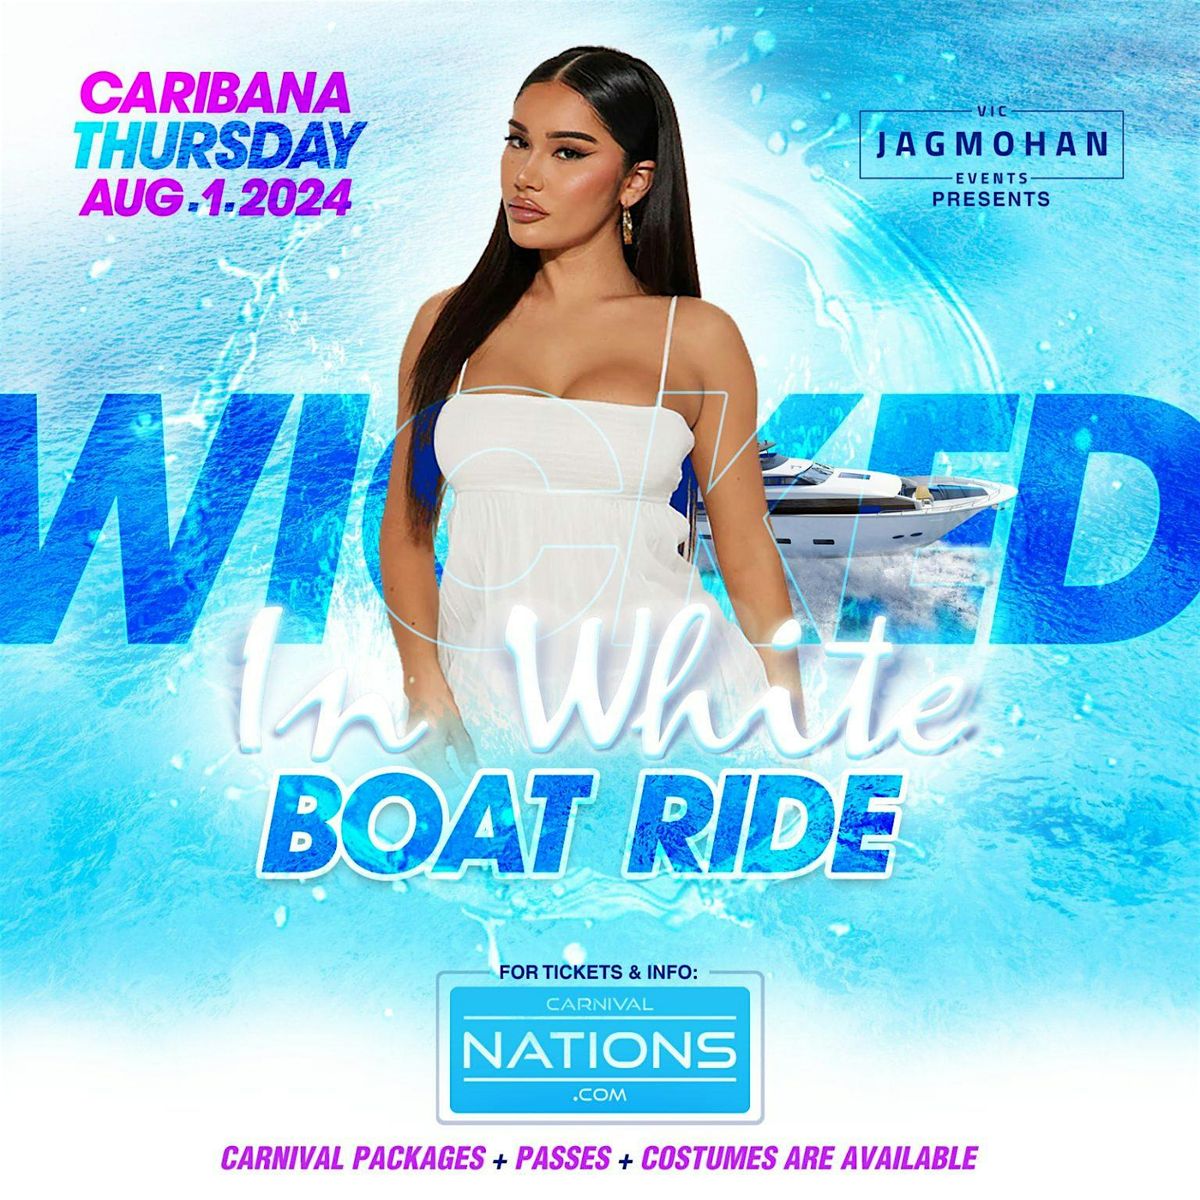 WICKED IN WHITE BOAT CRUISE